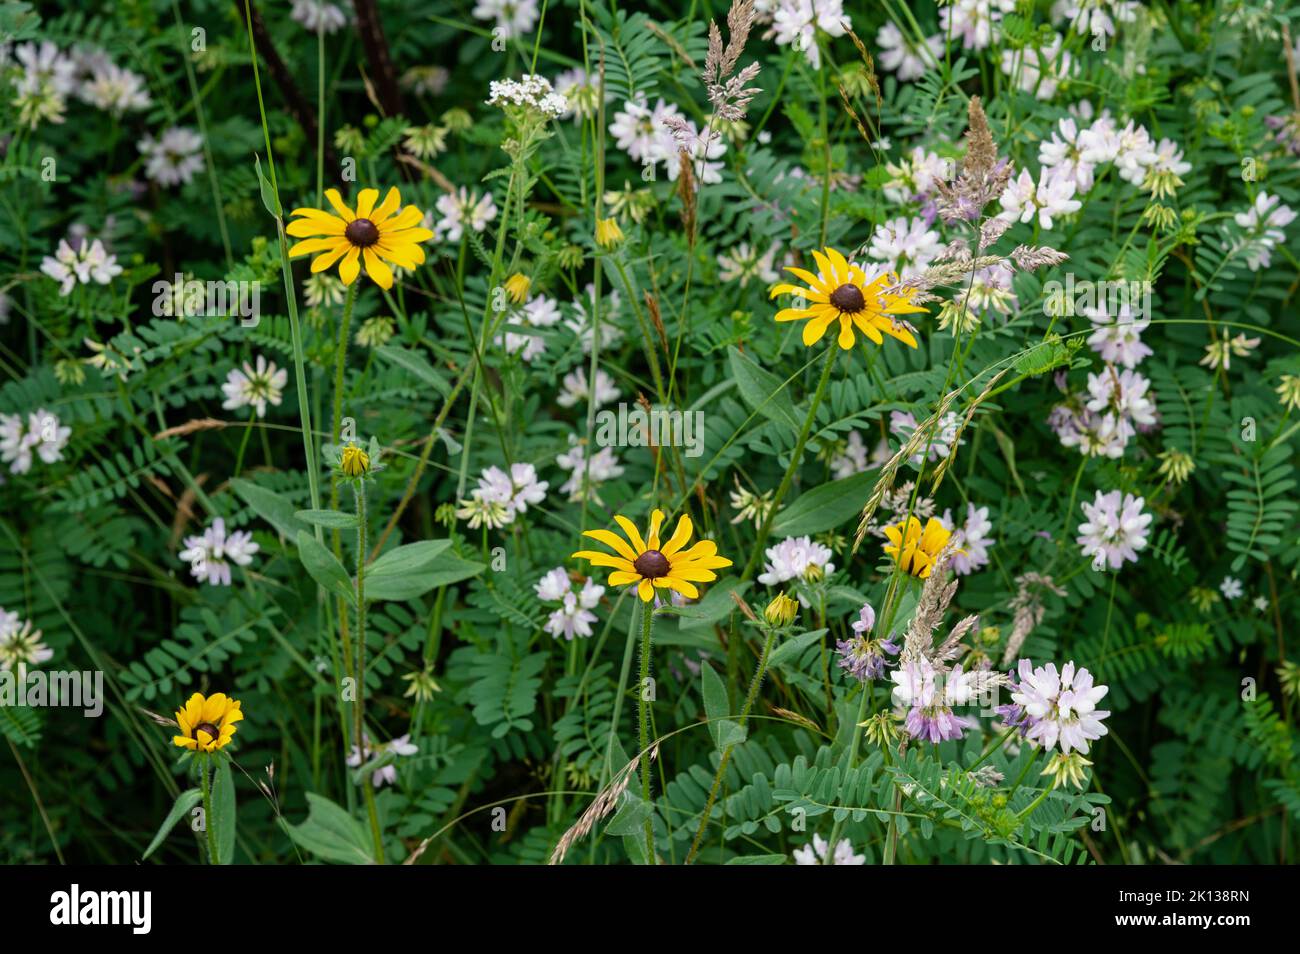 Wildflowers in a mountain meadow along the Appalachian Trail, Blue Ridge Mountains, North Carolina, United States of America, North America Stock Photo